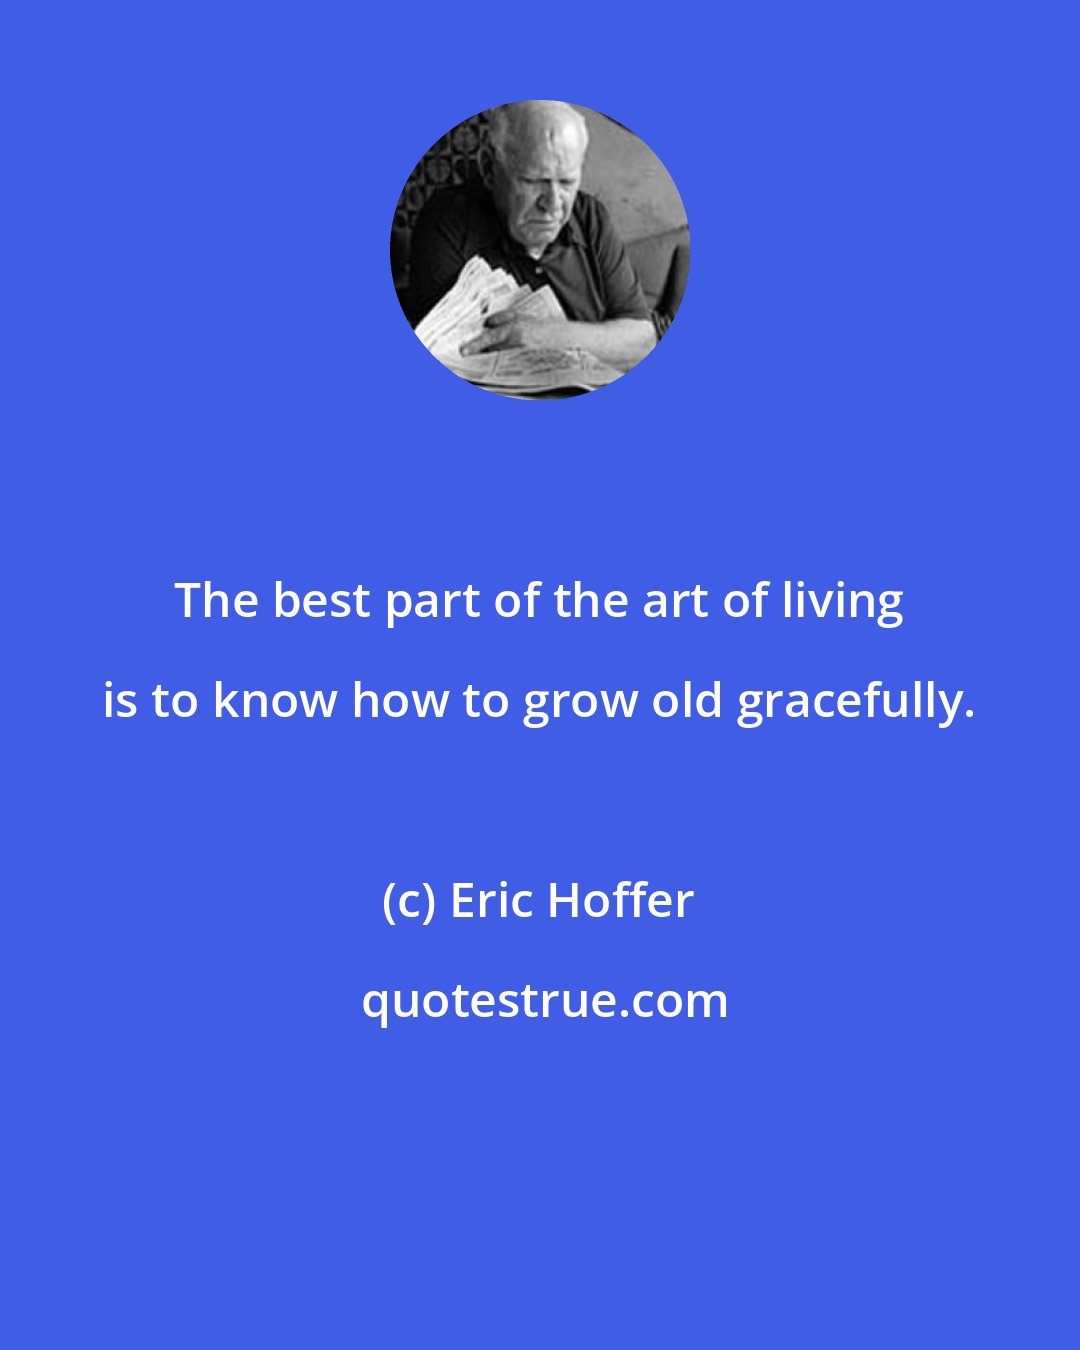 Eric Hoffer: The best part of the art of living is to know how to grow old gracefully.